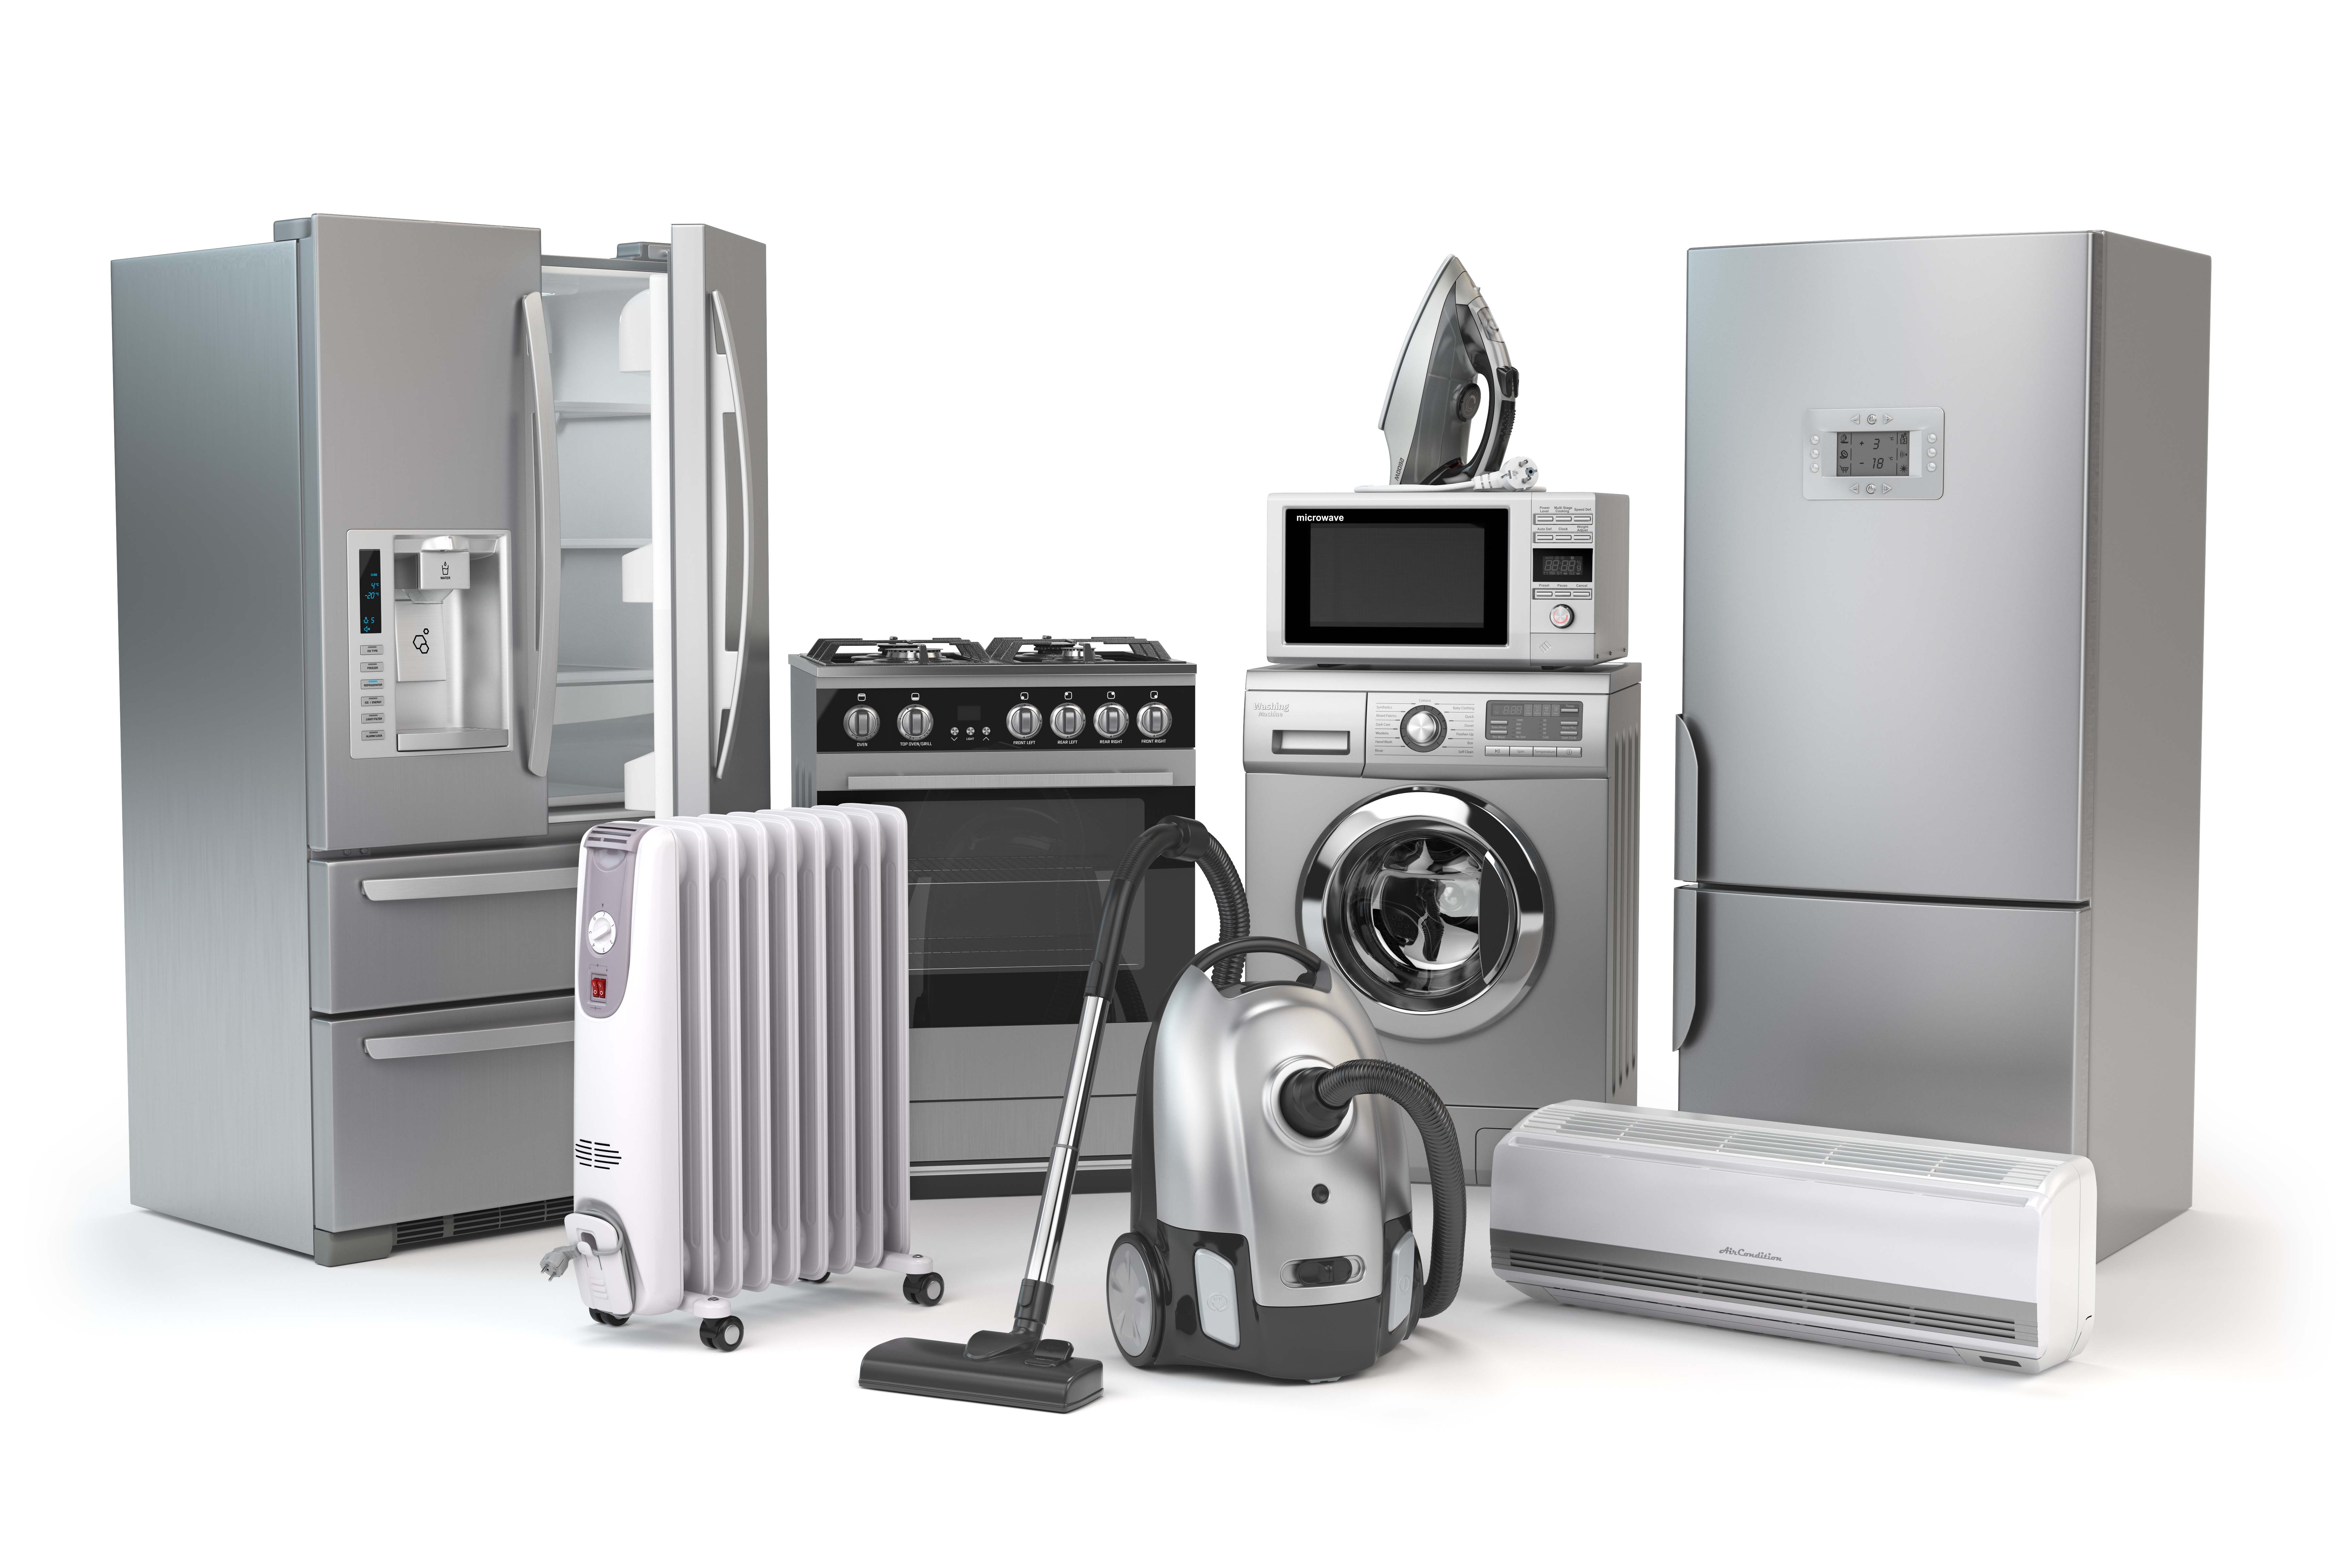 Household Appliances Testing and Evaluation Application - Konica